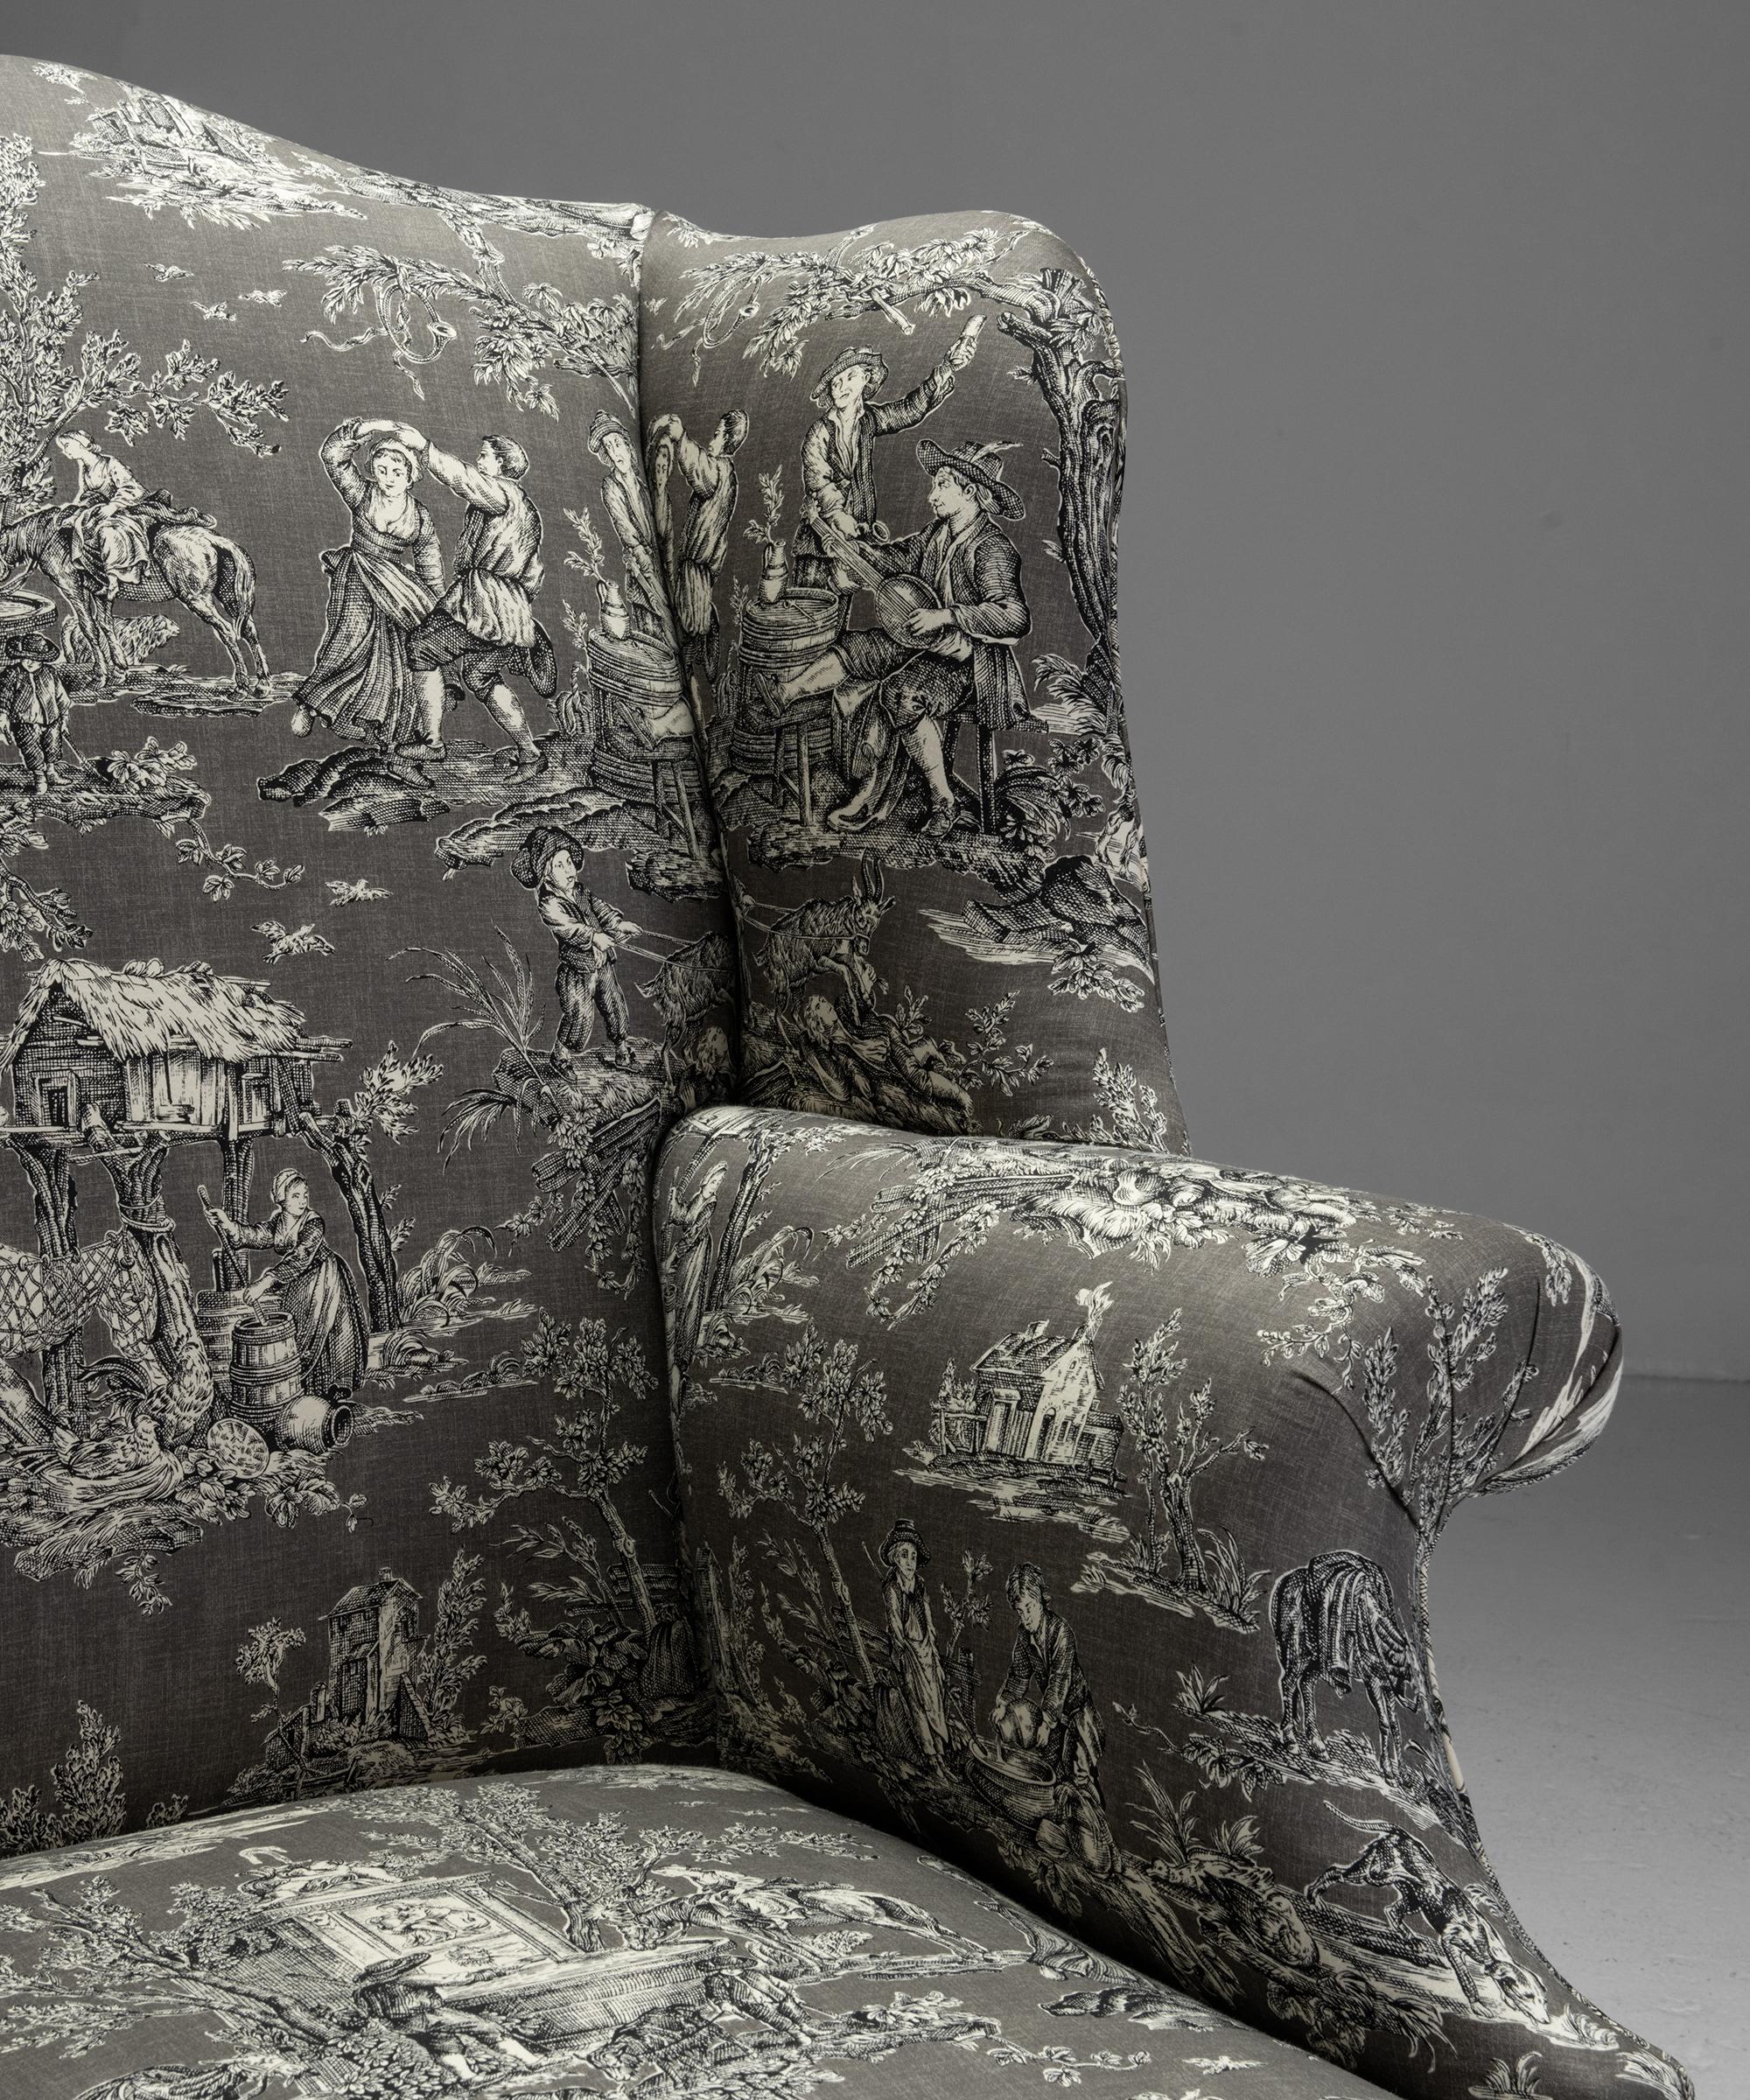 English Georgian Wing Chair in 100% Cotton Toile Fabric from Pierre Frey